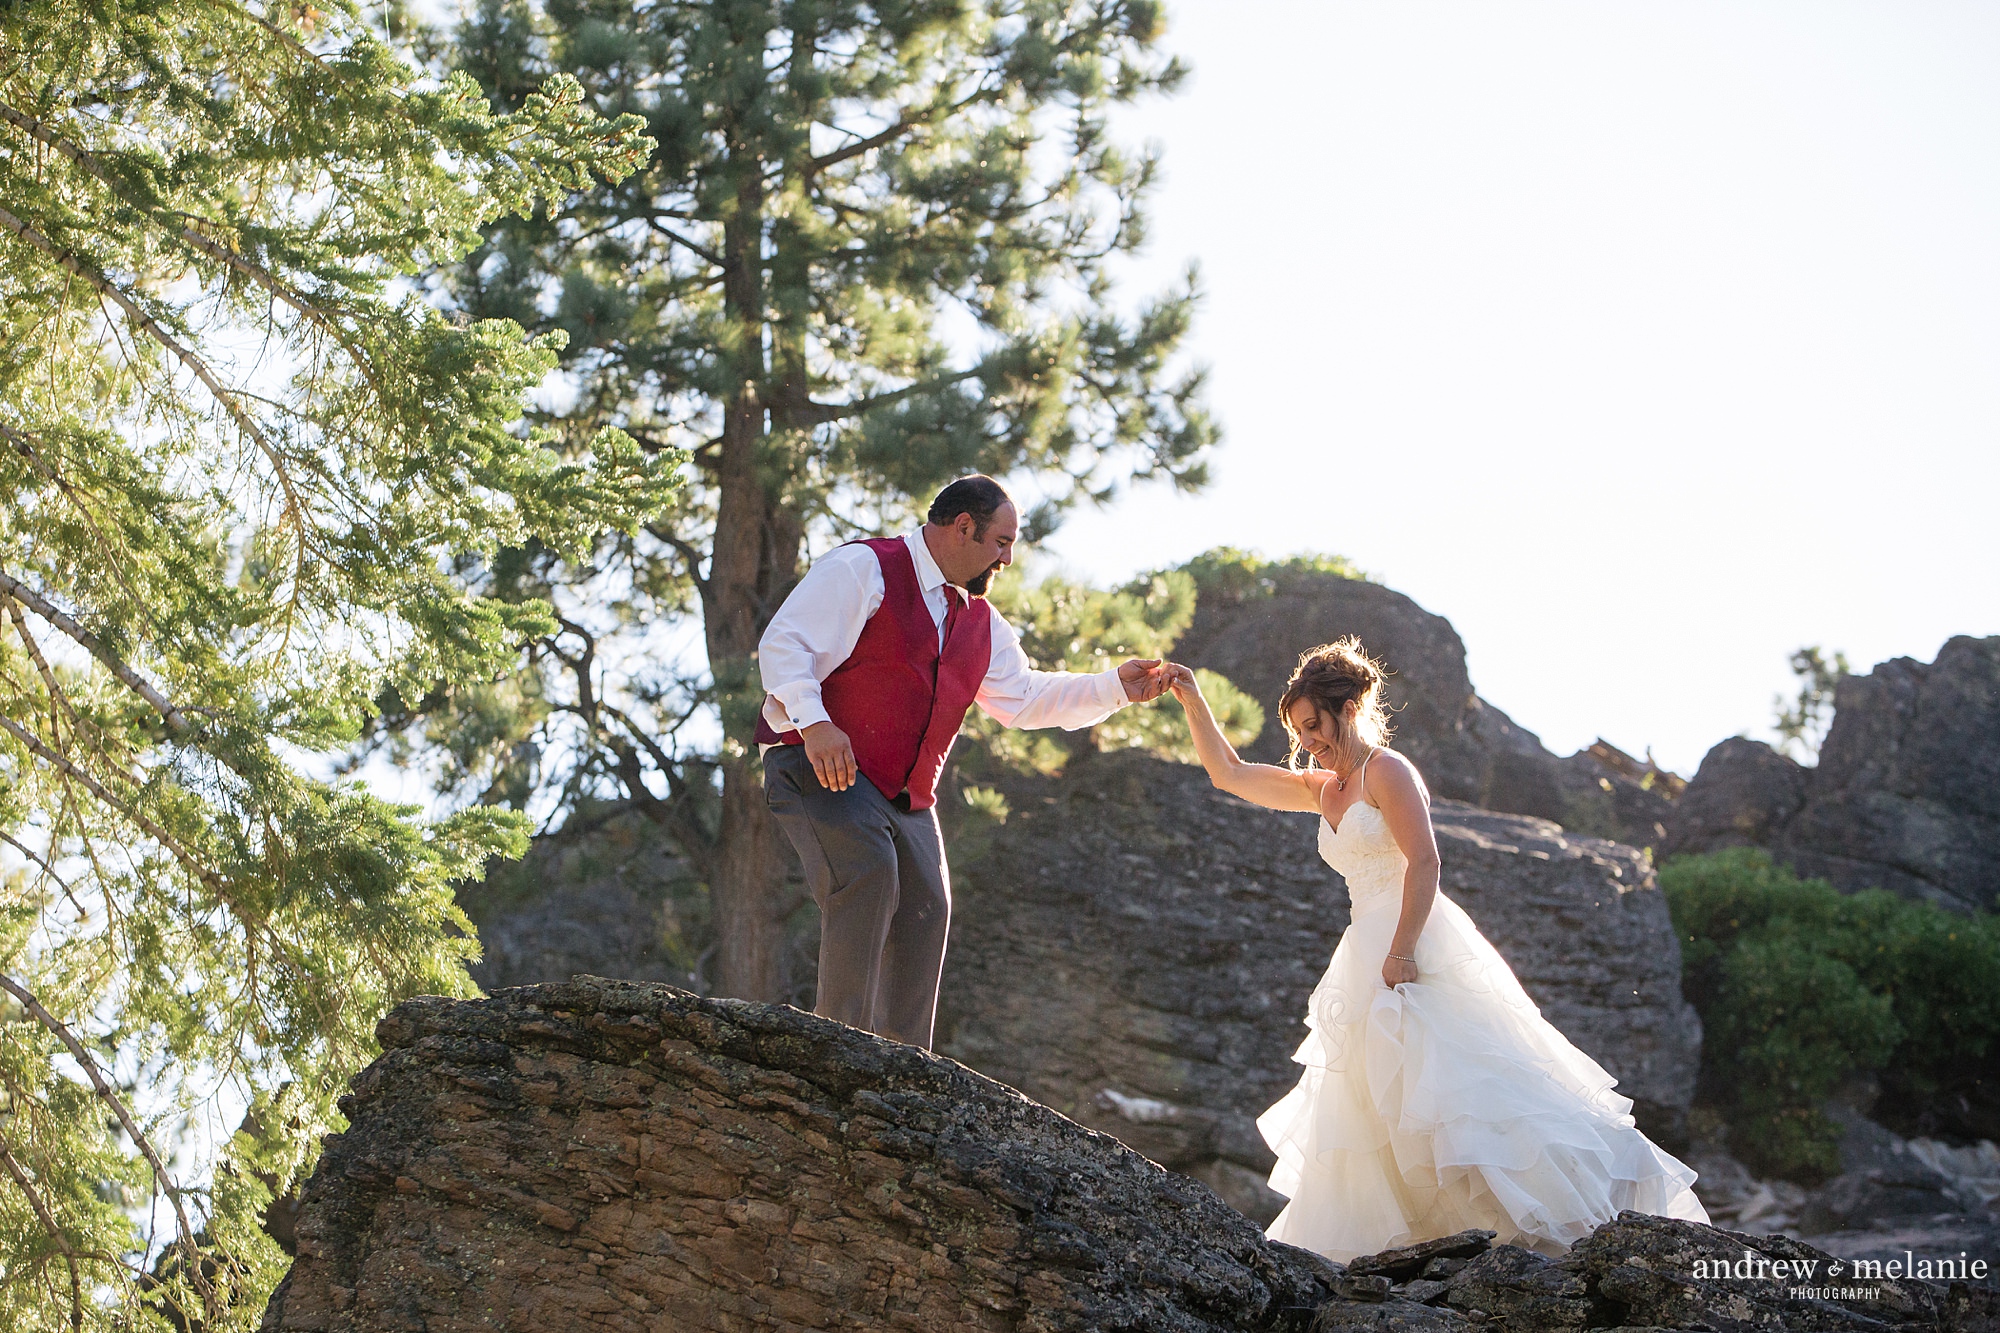 Andrew and Melanie Photography wedding highlights Truckee, CA